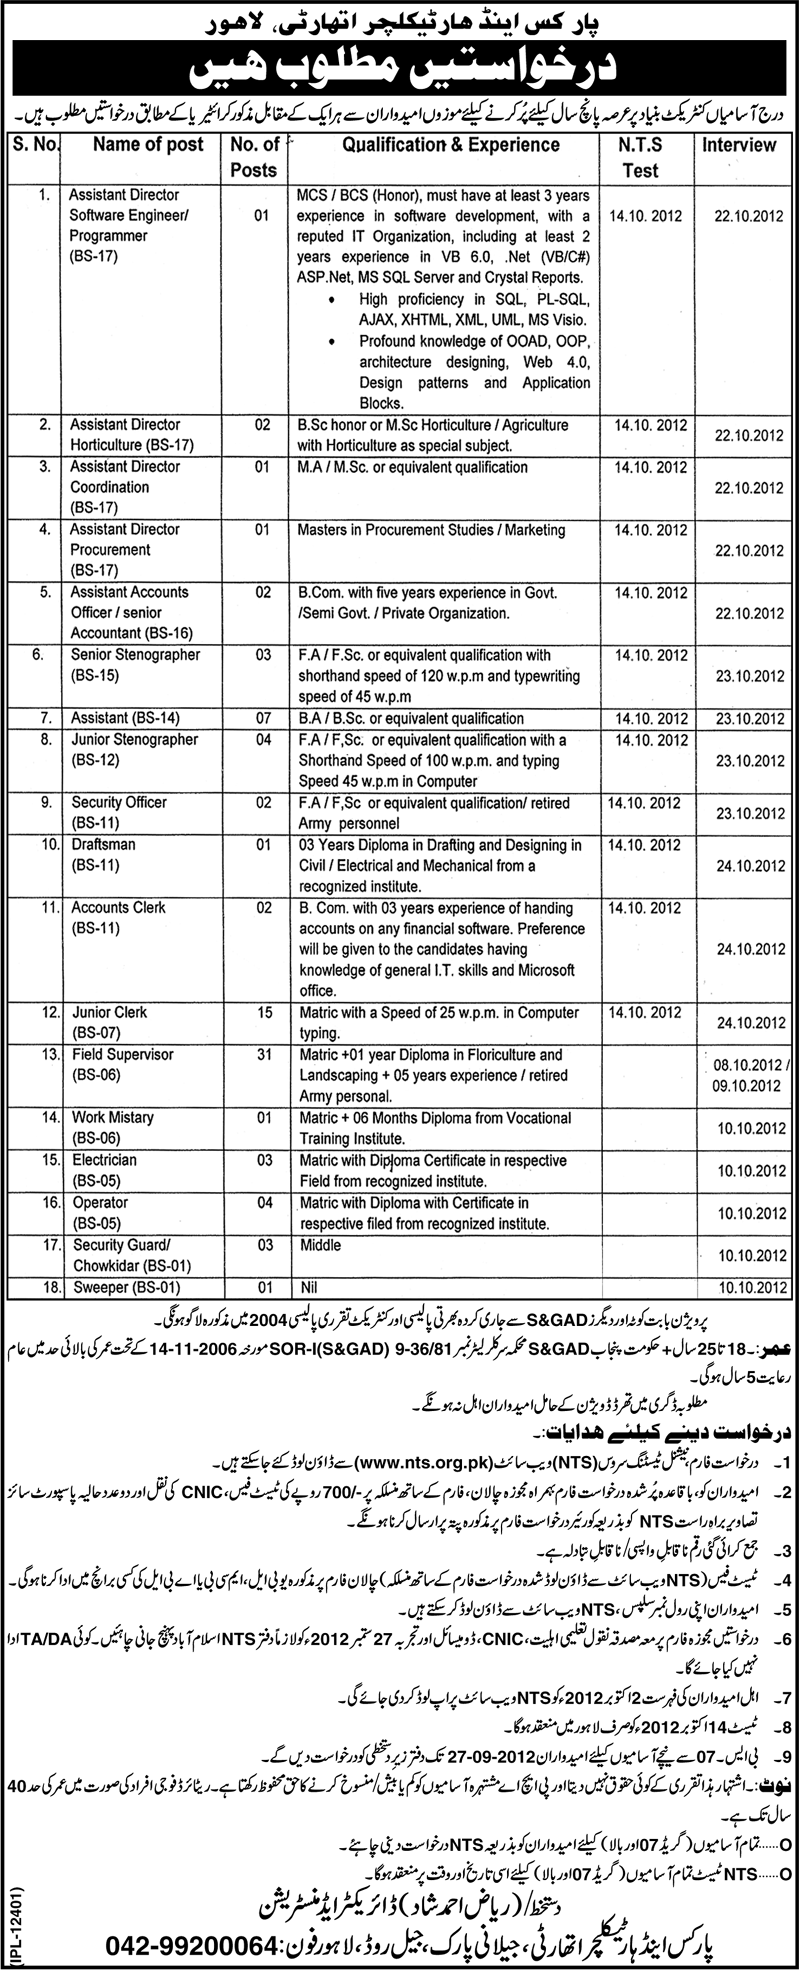 Parks and Horticulture Authority Lahore Requires Staff (Government Job)